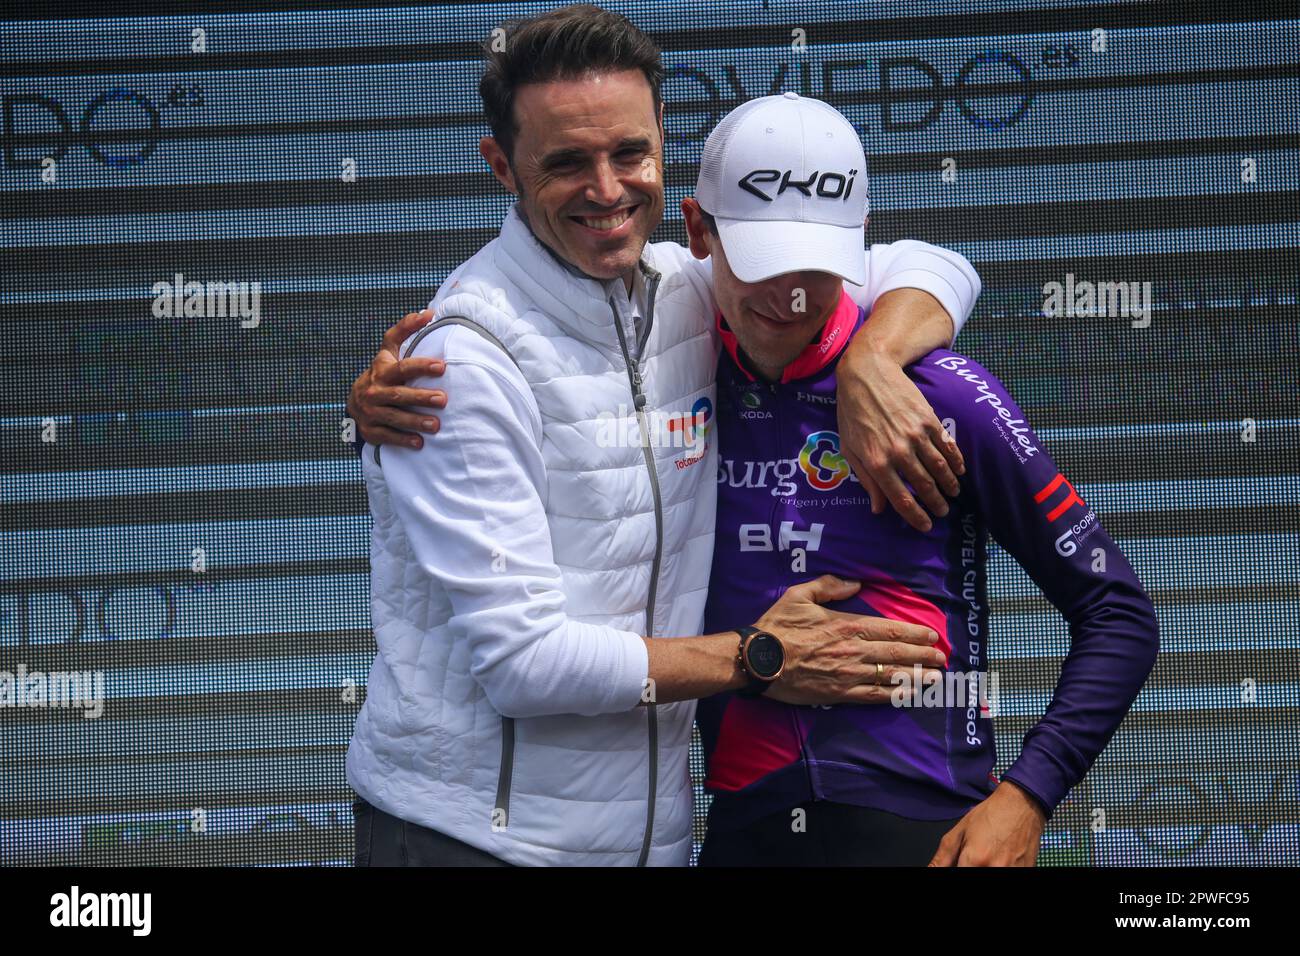 Oviedo, Spain, 30th April, 2023: Burgos-BH rider Pelayo Sanchez (R) is congratulated by Samuel Sanchez (L) during the 3rd stage of Vuelta a Asturias 2023 between Cangas del Narcea and Oviedo, on April 30 2023, in Oviedo, Spain. Credit: Alberto Brevers / Alamy Live News Stock Photo